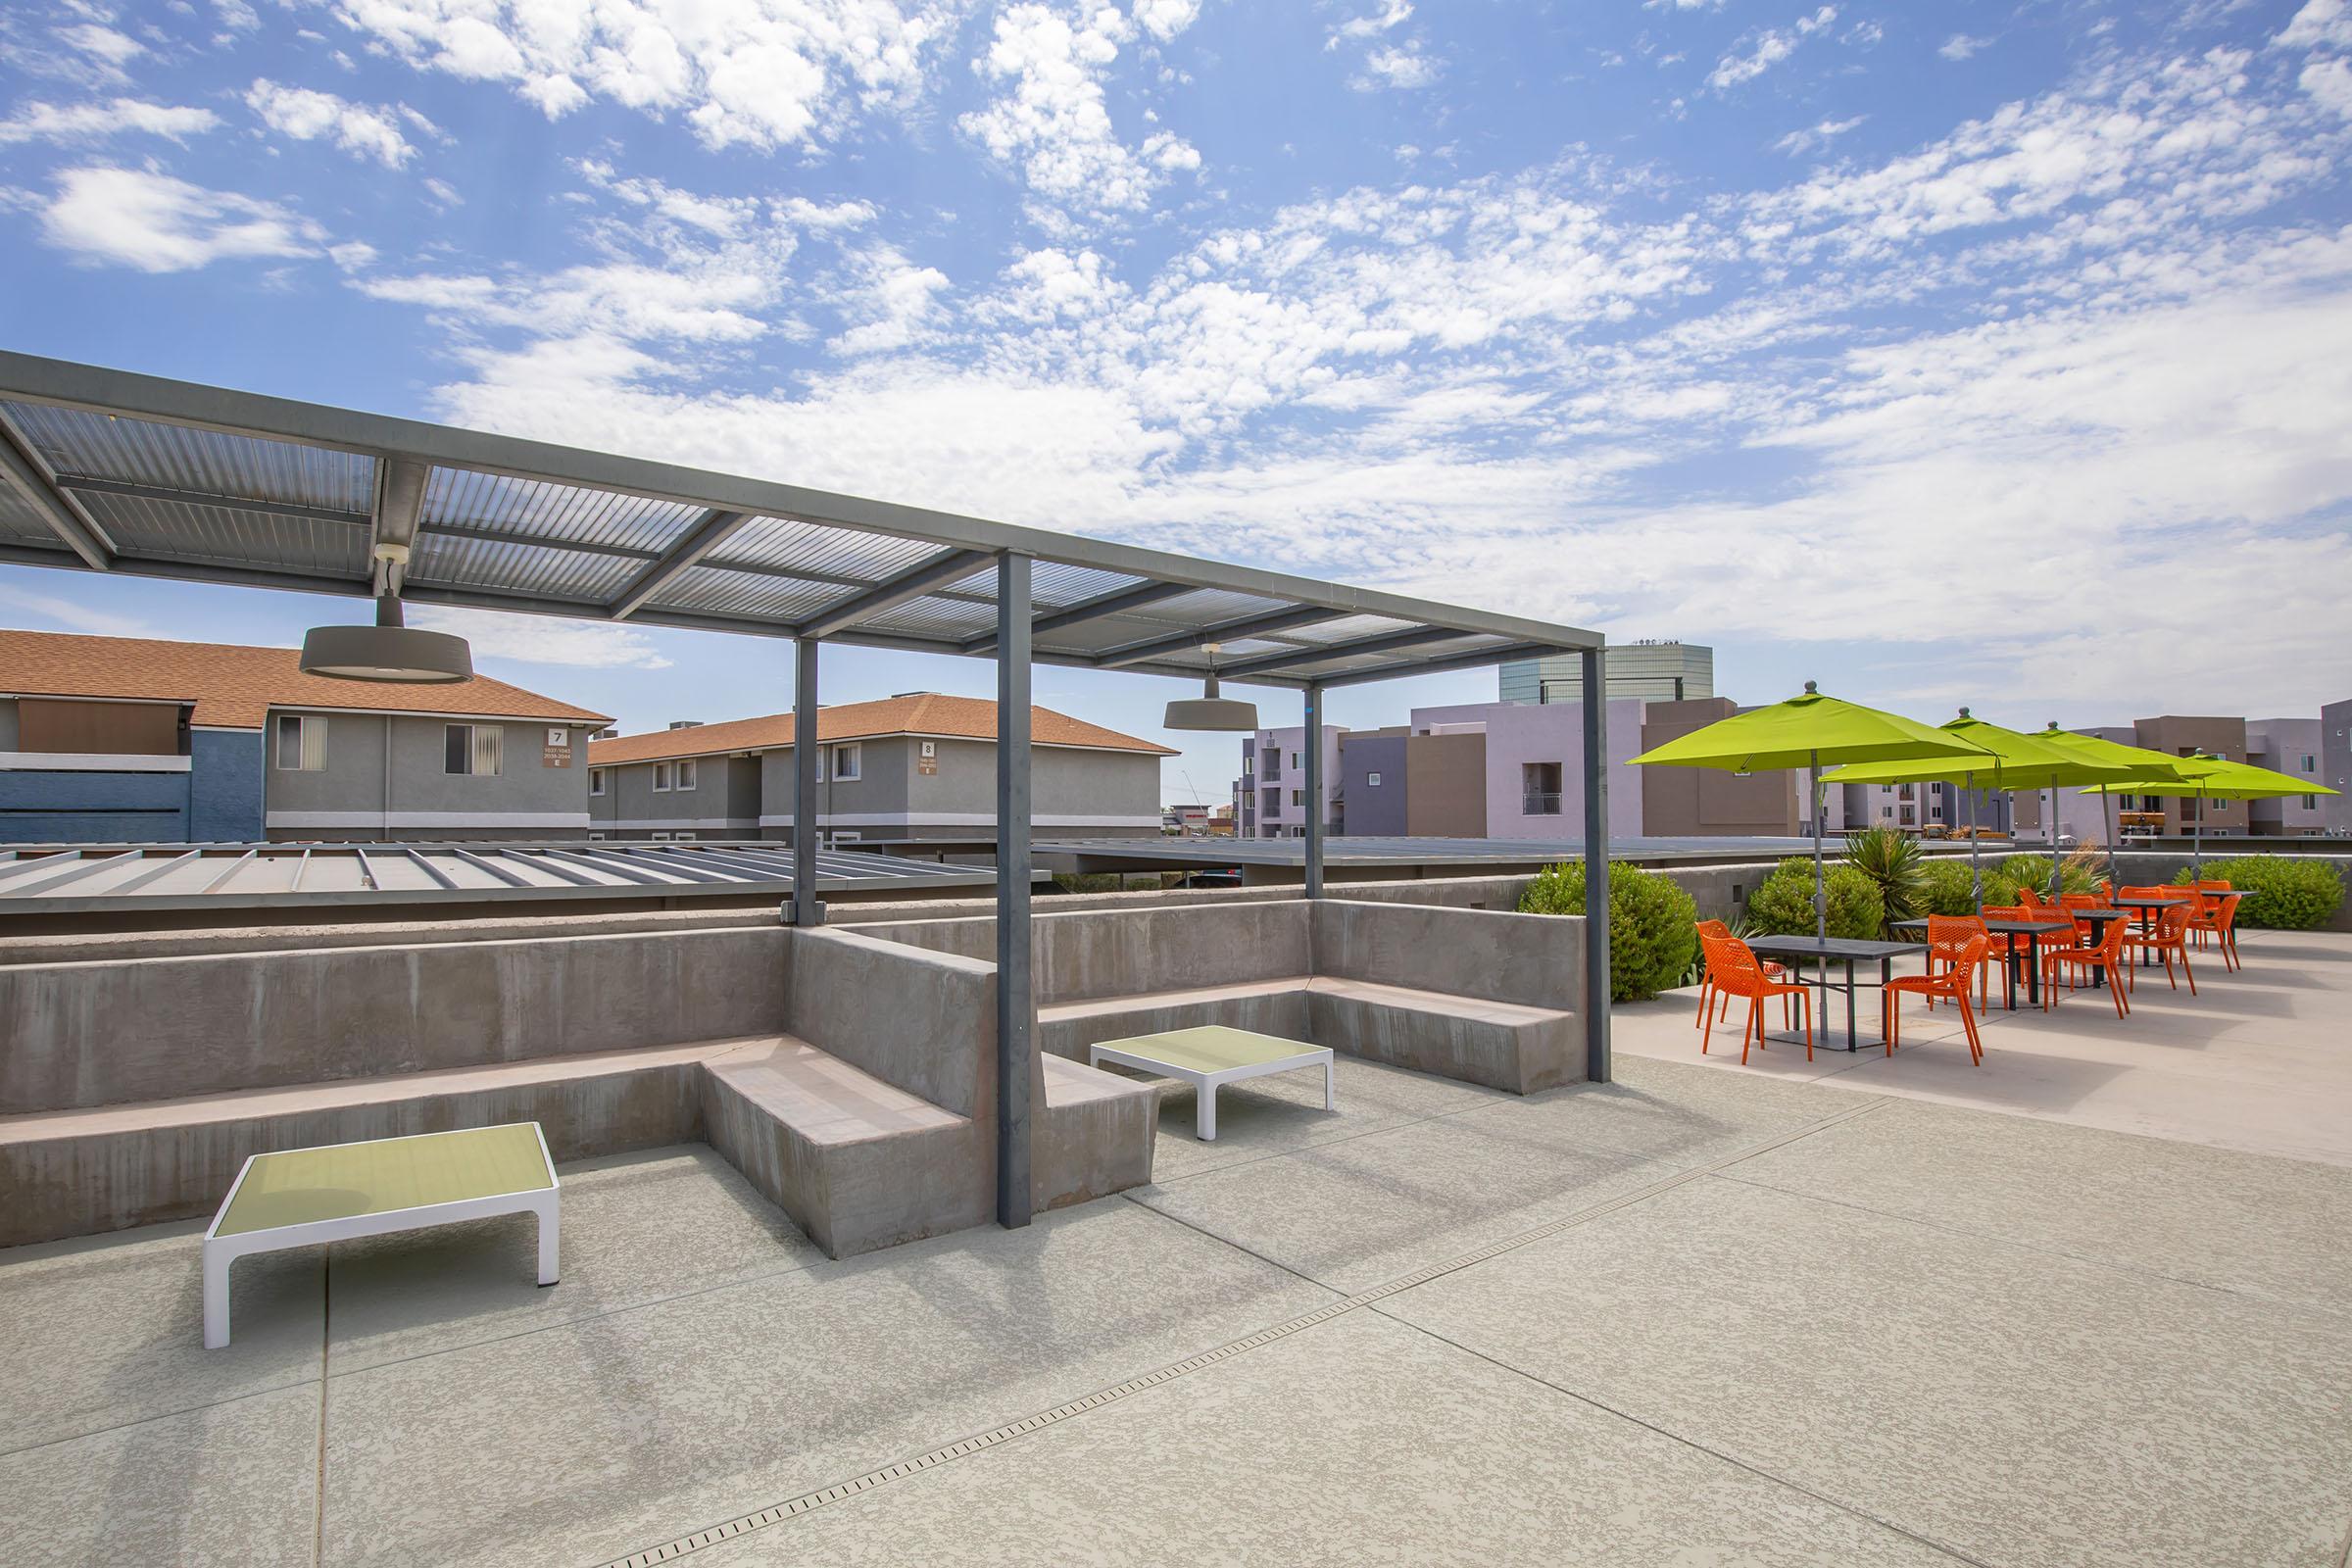 Rise at the District apartments outdoor patio with cabanas, tables, and chairs